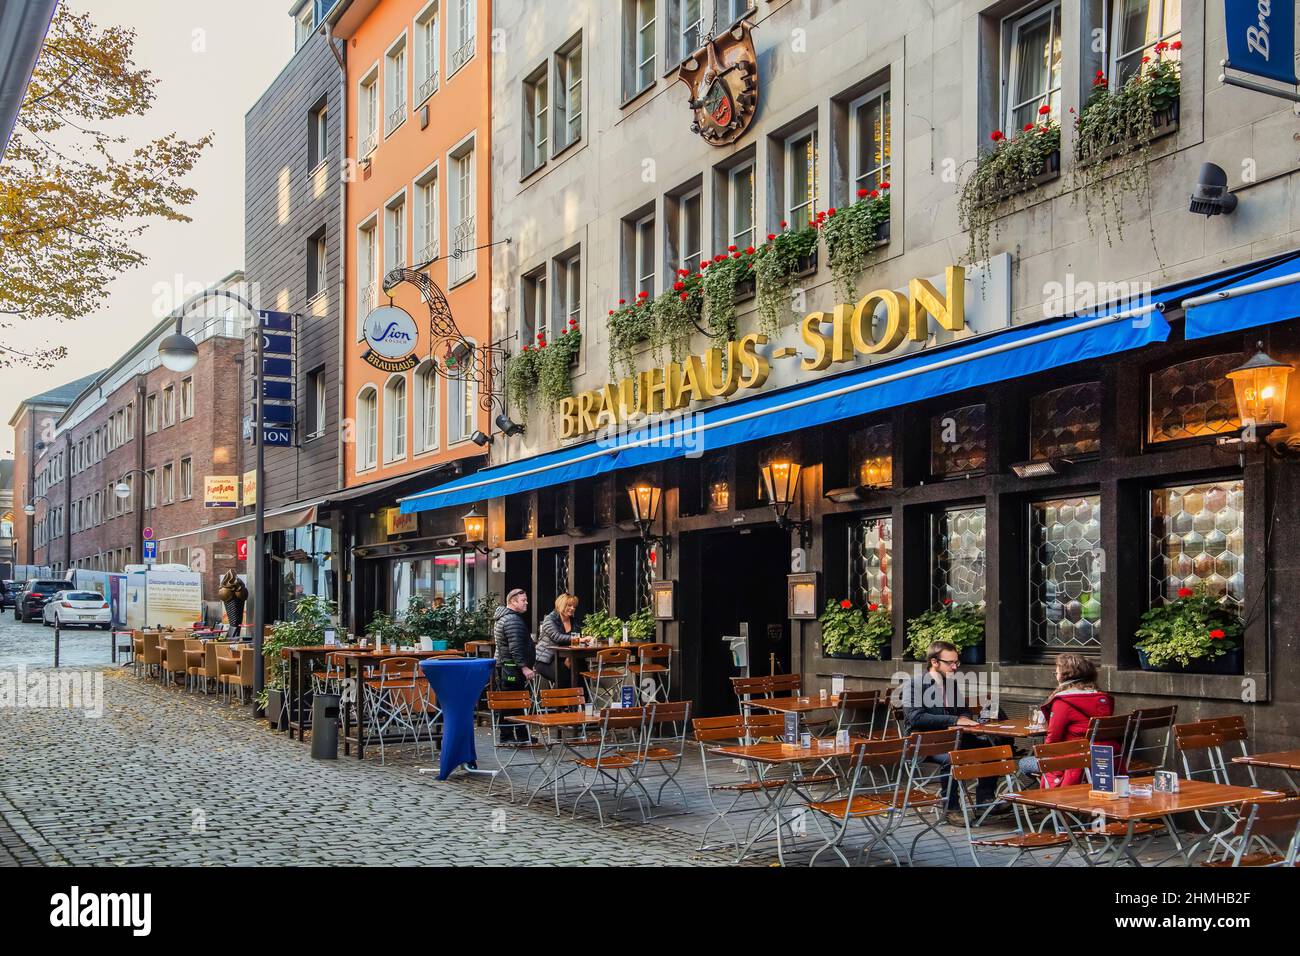 Historic brewery Sion in the old town, Cologne, North Rhine-Westphalia, Germany Stock Photo